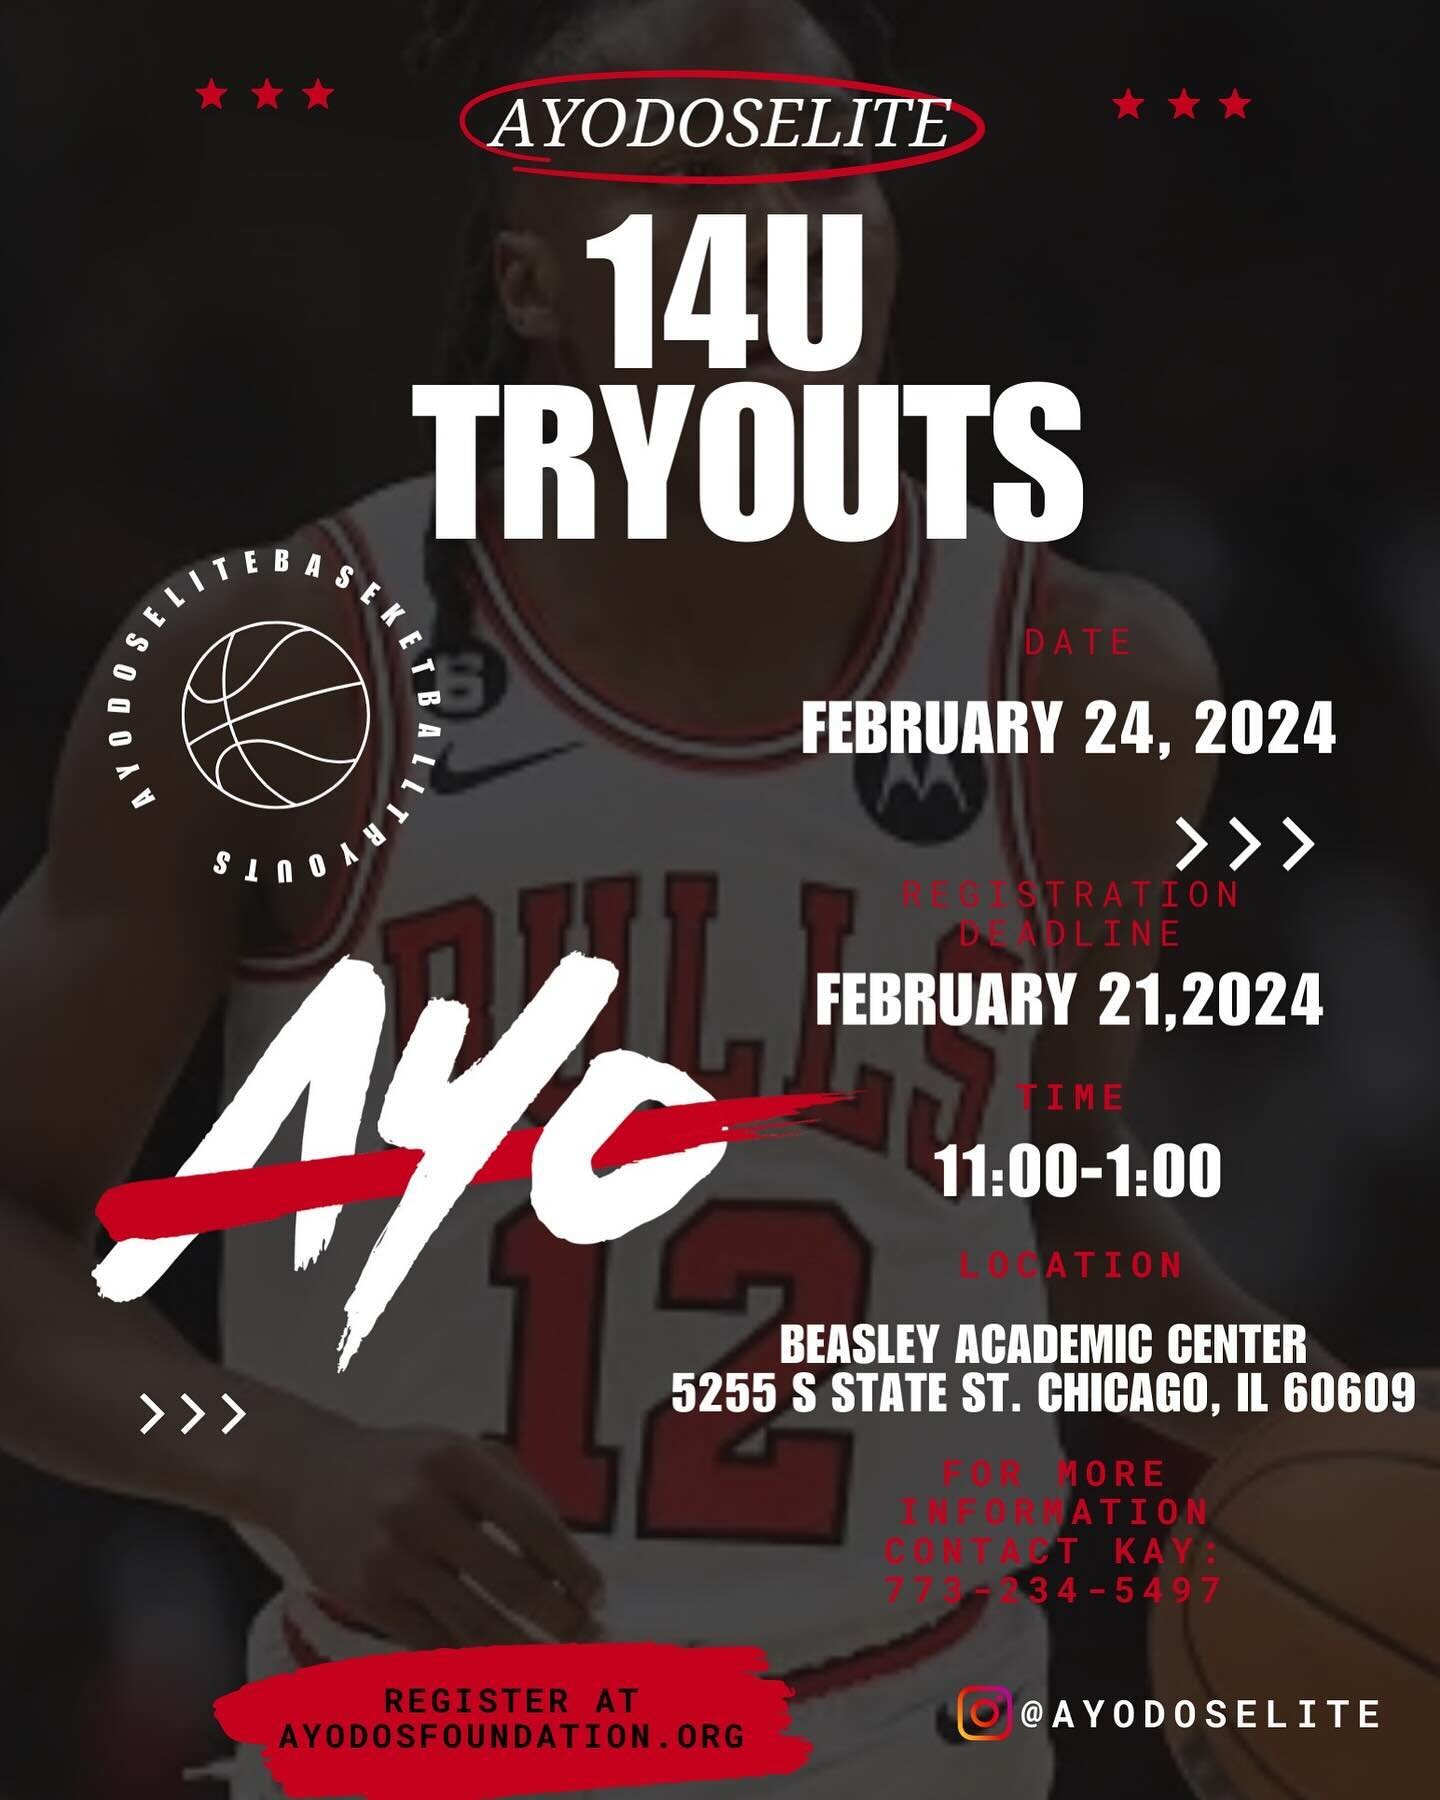 Hey 14U Ballers! Exciting news - we&rsquo;re adding you all to the mix! Ayo Dos Elite 14U tryouts will be held simultaneously with the 13U tryouts on February 24, 2024. Bring your A-game and let&rsquo;s work hard together. See you all there! Don&rsqu